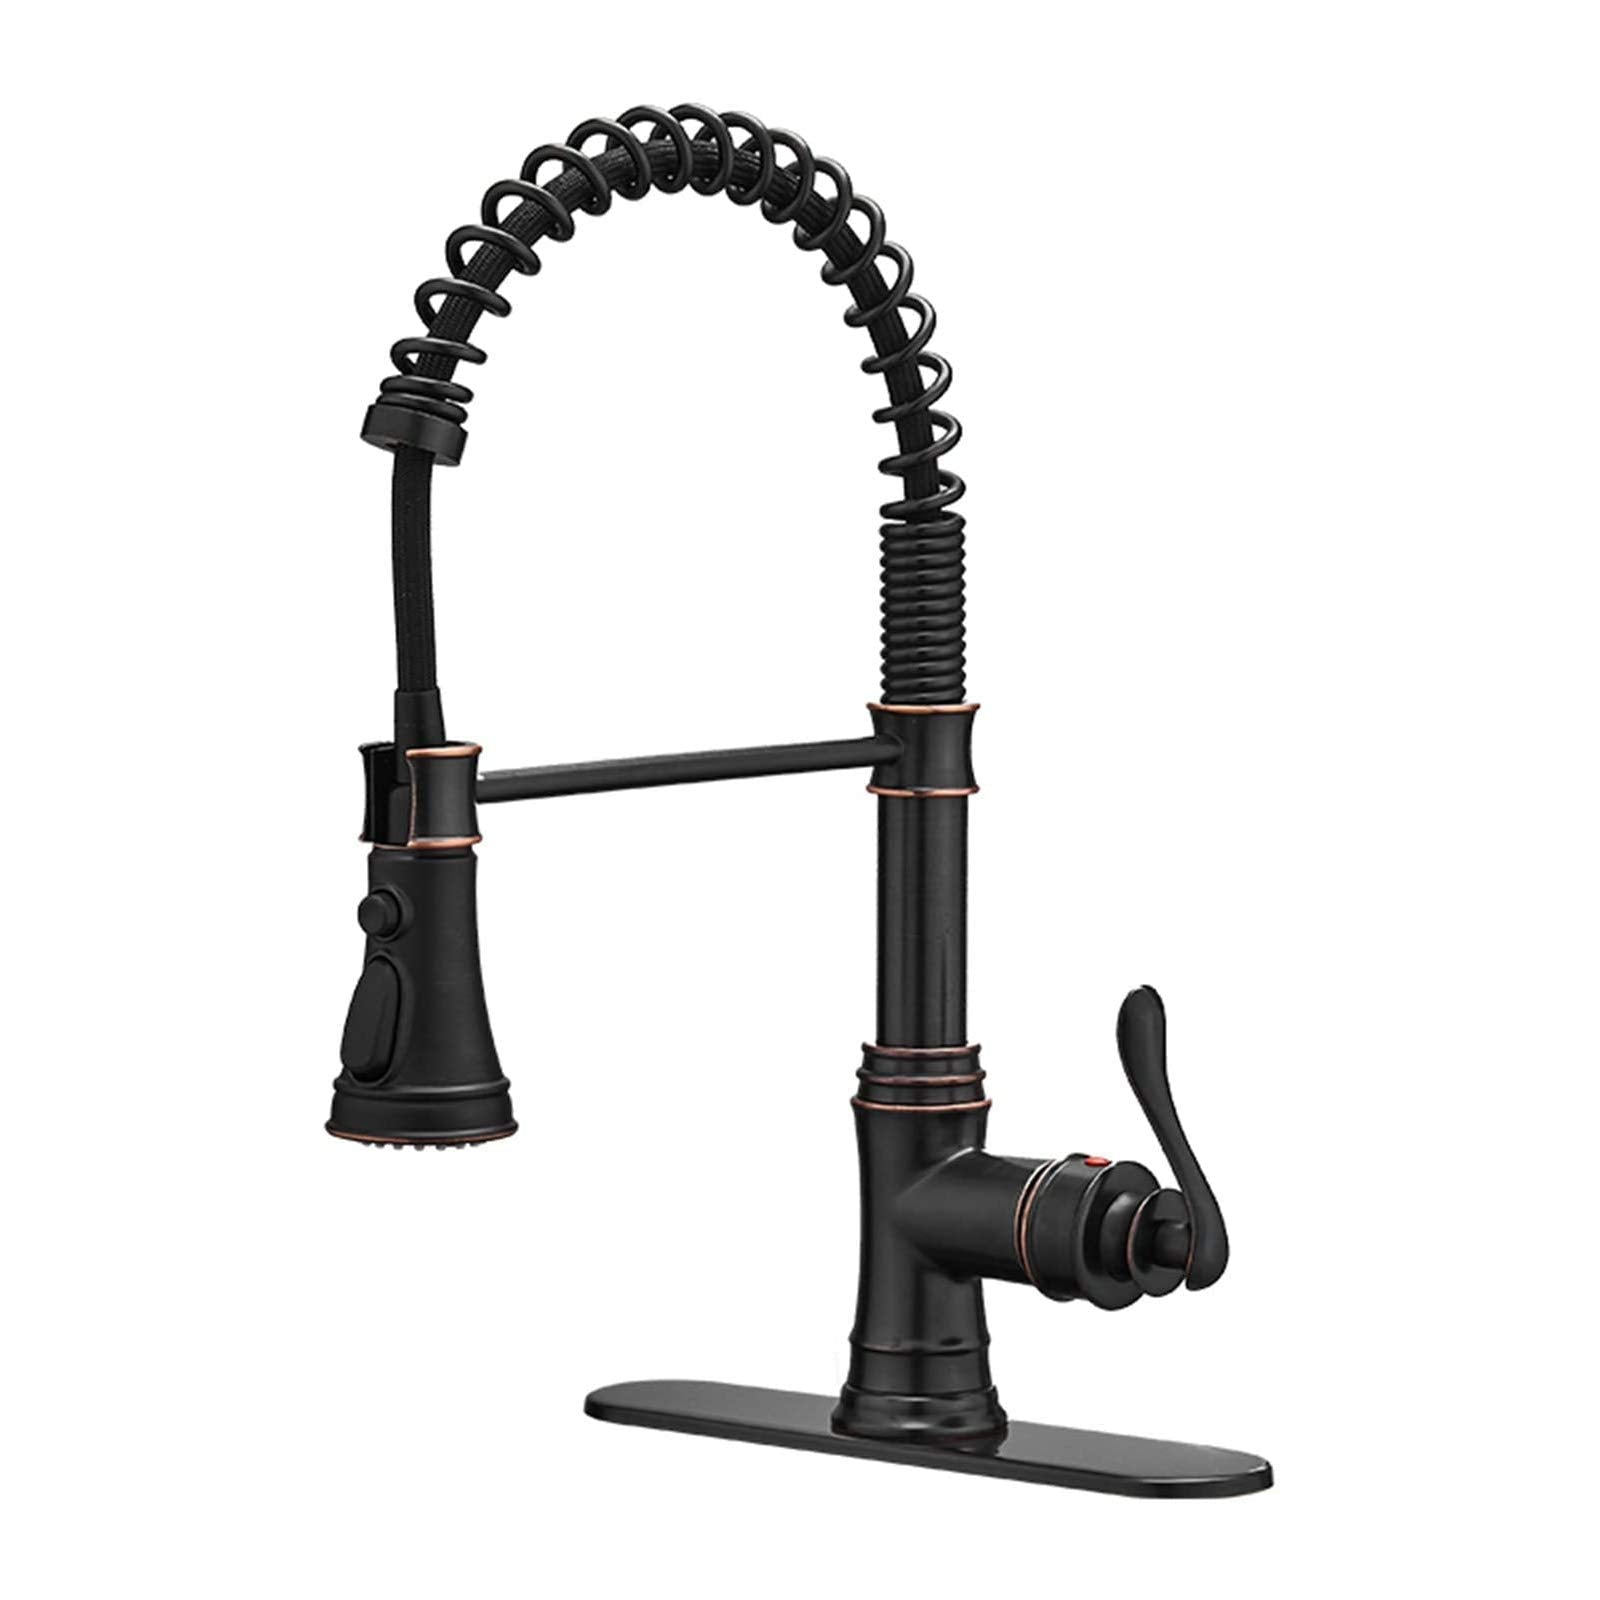 Pull-Down Sprayer 3 Spray Kitchen Faucet Oil Rubbed Bronze - buyfaucet.com